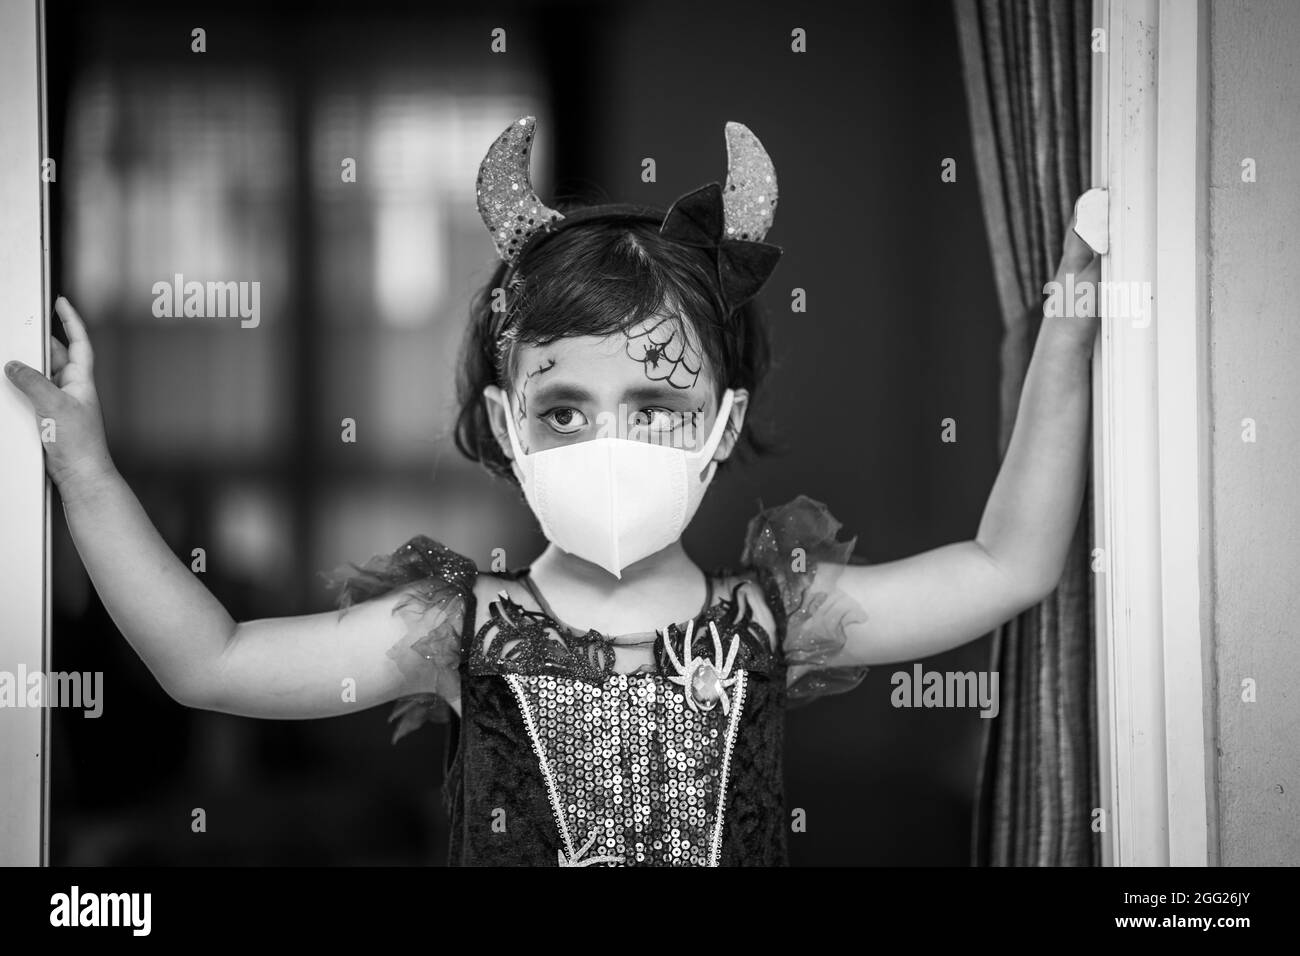 Grayscale shot of a Southeast Asian girl in a Halloween costume and makeup wearing a sanitary mask Stock Photo